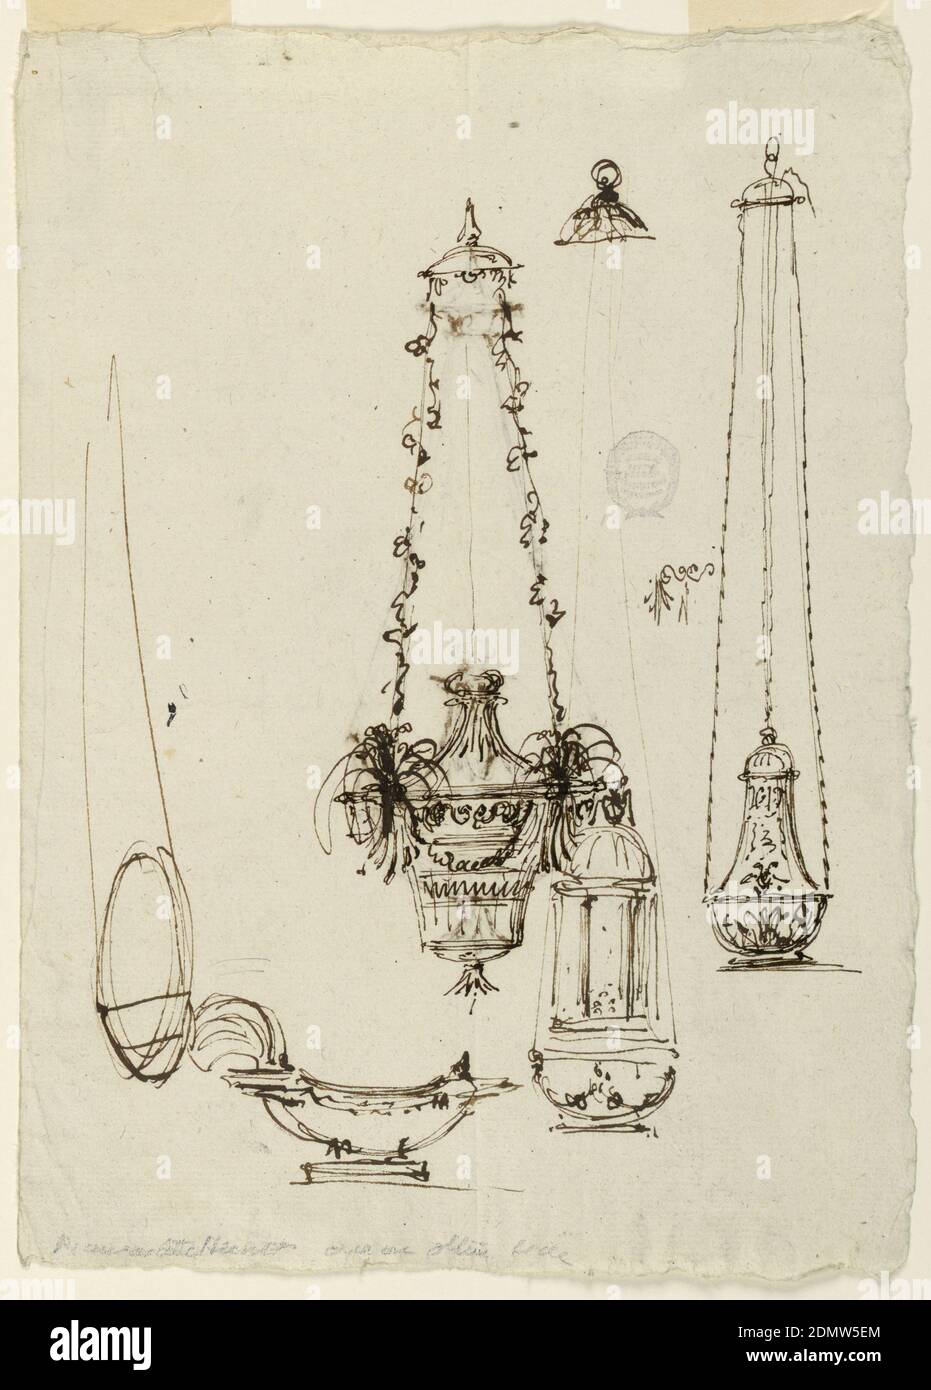 Altar Lamps, Censers, Incense Boat, Pen and brown ink on off-white laid paper, Loose sketches. Censer with floral chains., Italy, ca. 1800, metalwork, Drawing Stock Photo